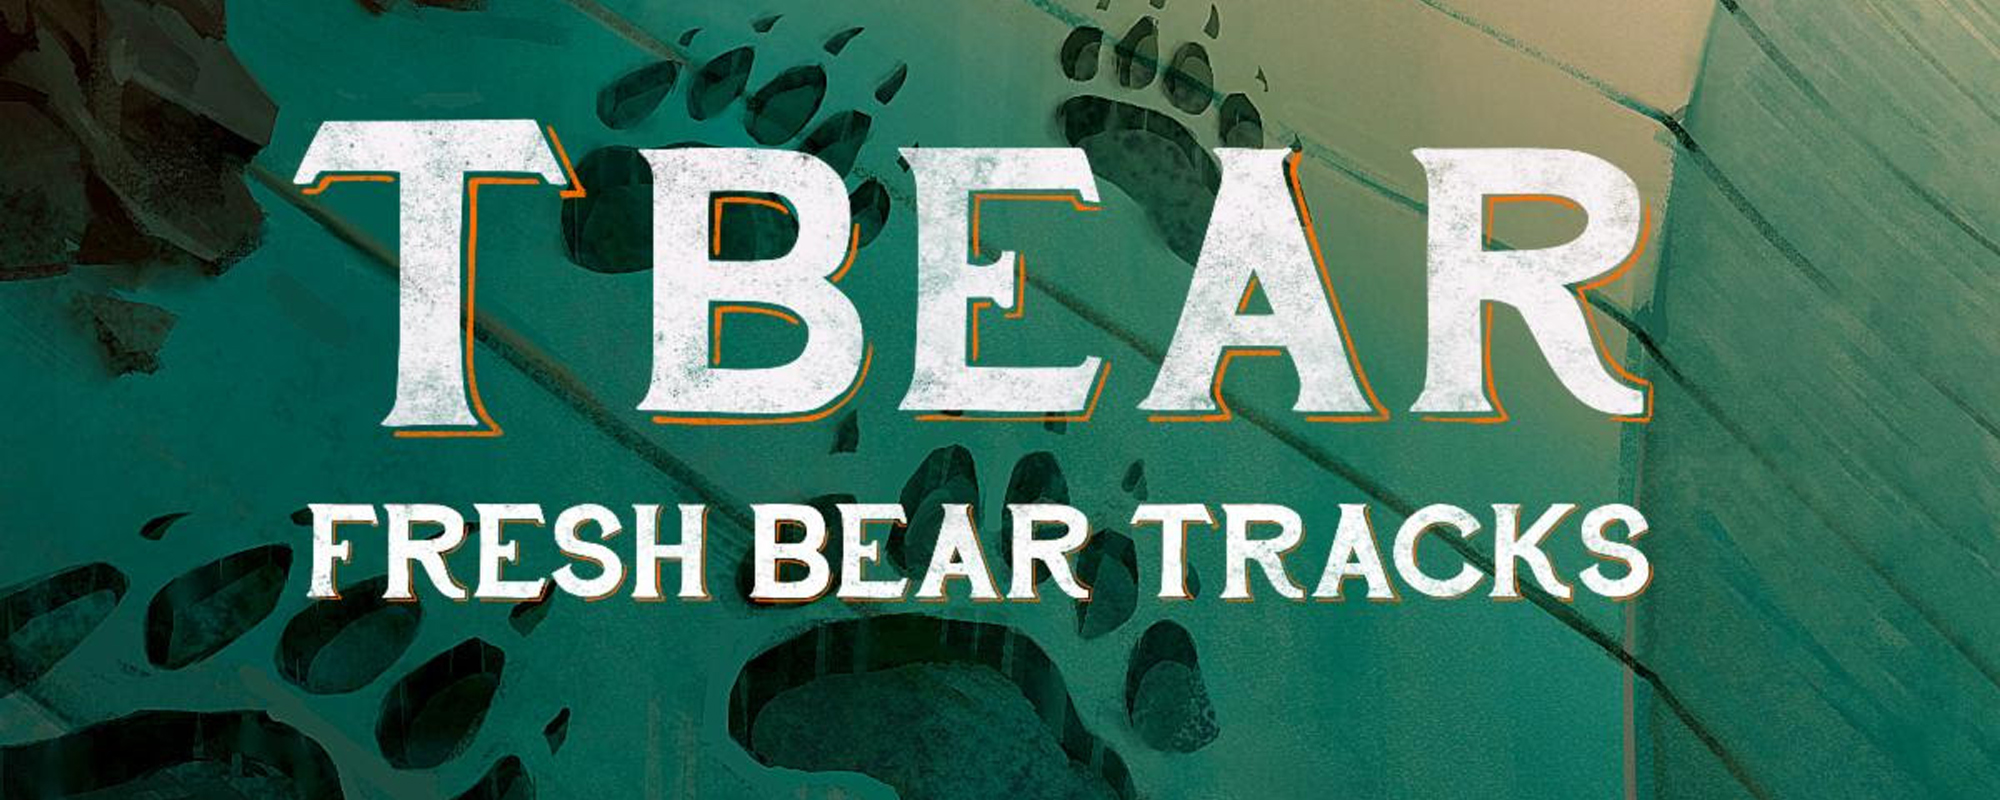 Review: Out of Hibernation, T Bear Returns to Rock